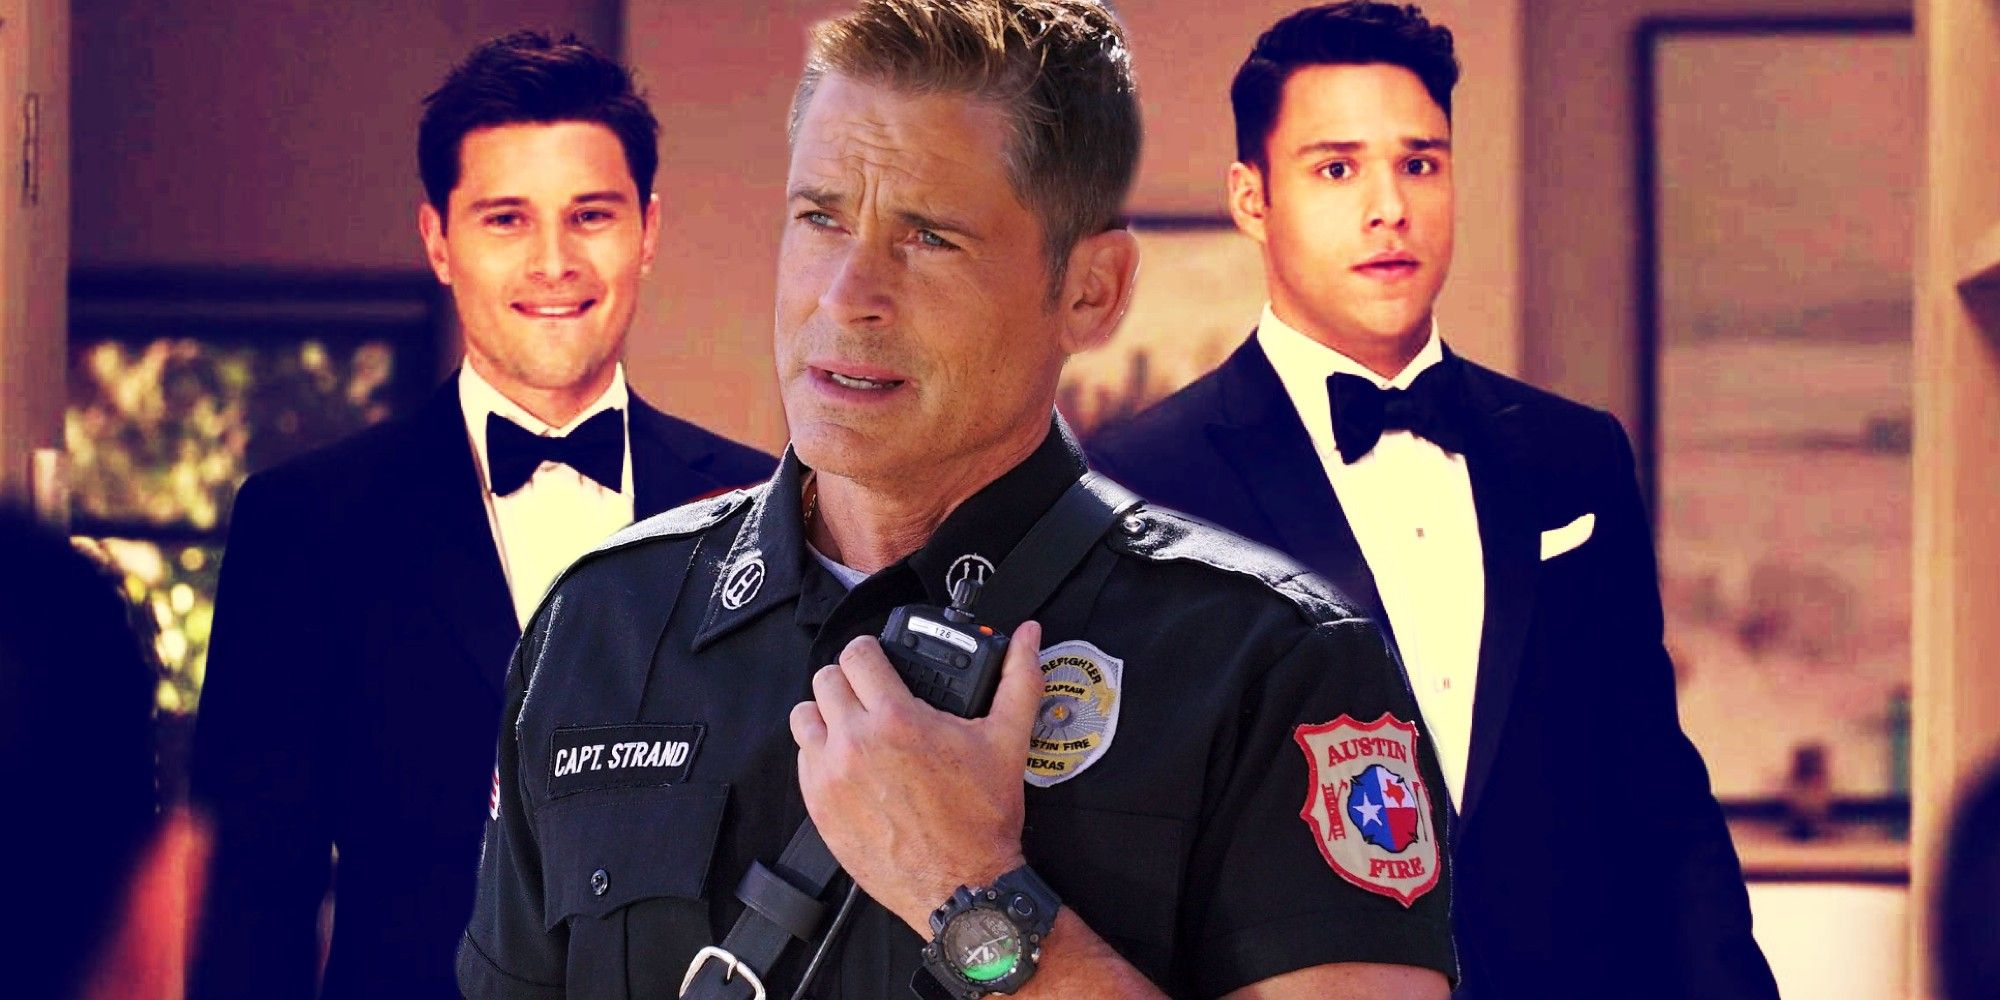 Custom image of Carlos and TK in the background and Rob Lowe's character in 9-1-1 Lone Star